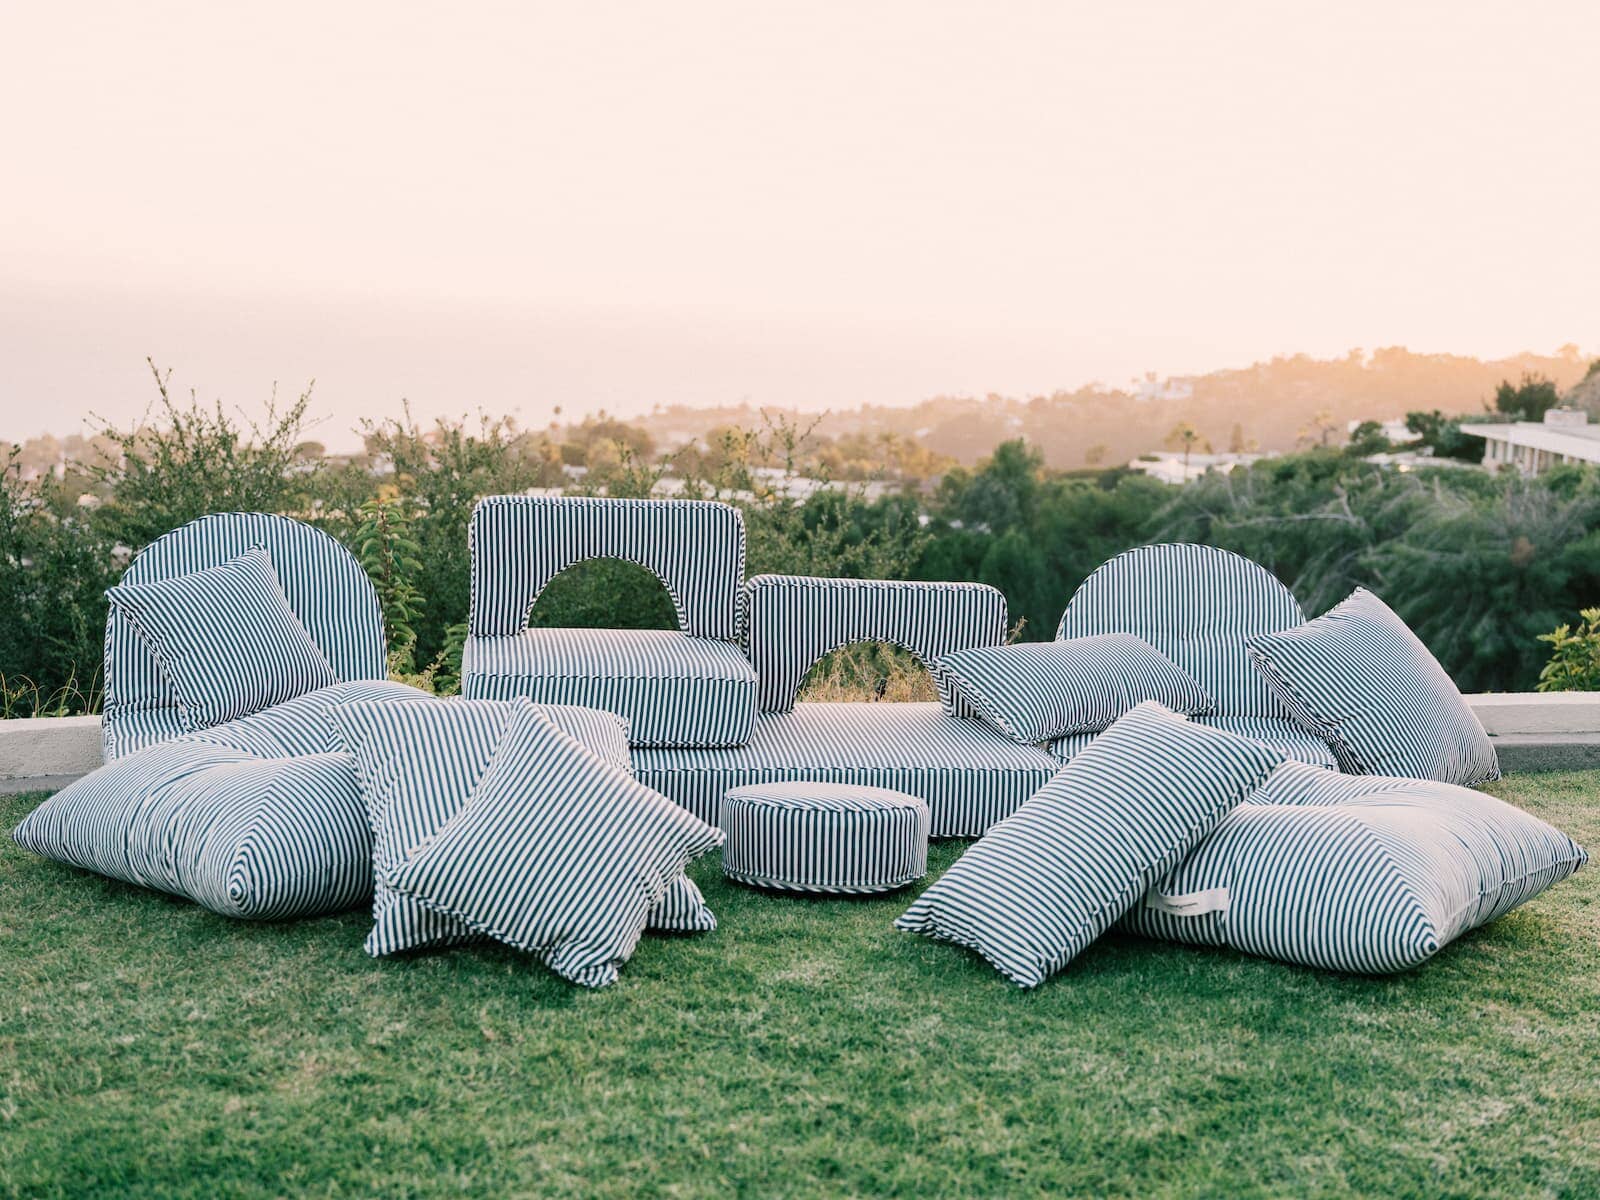 complete cushion collection on grass